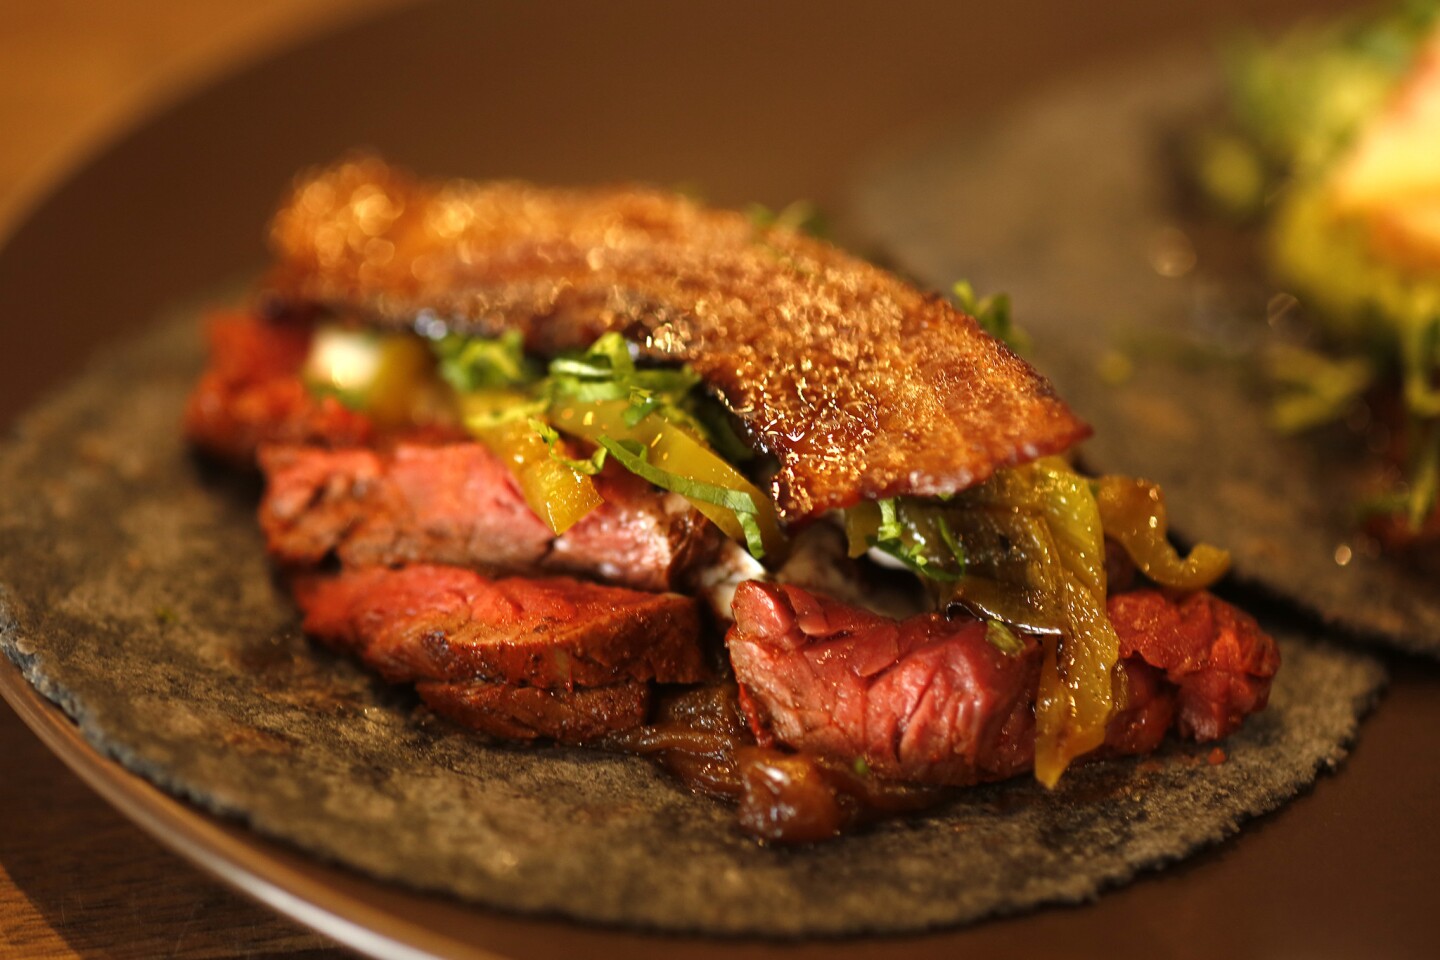 The Arrachera taco is made with hanger steak, roasted chiles, queso and topped with applewood bacon at Taco Maria at the OC Mix at SoCo in Costa Mesa.